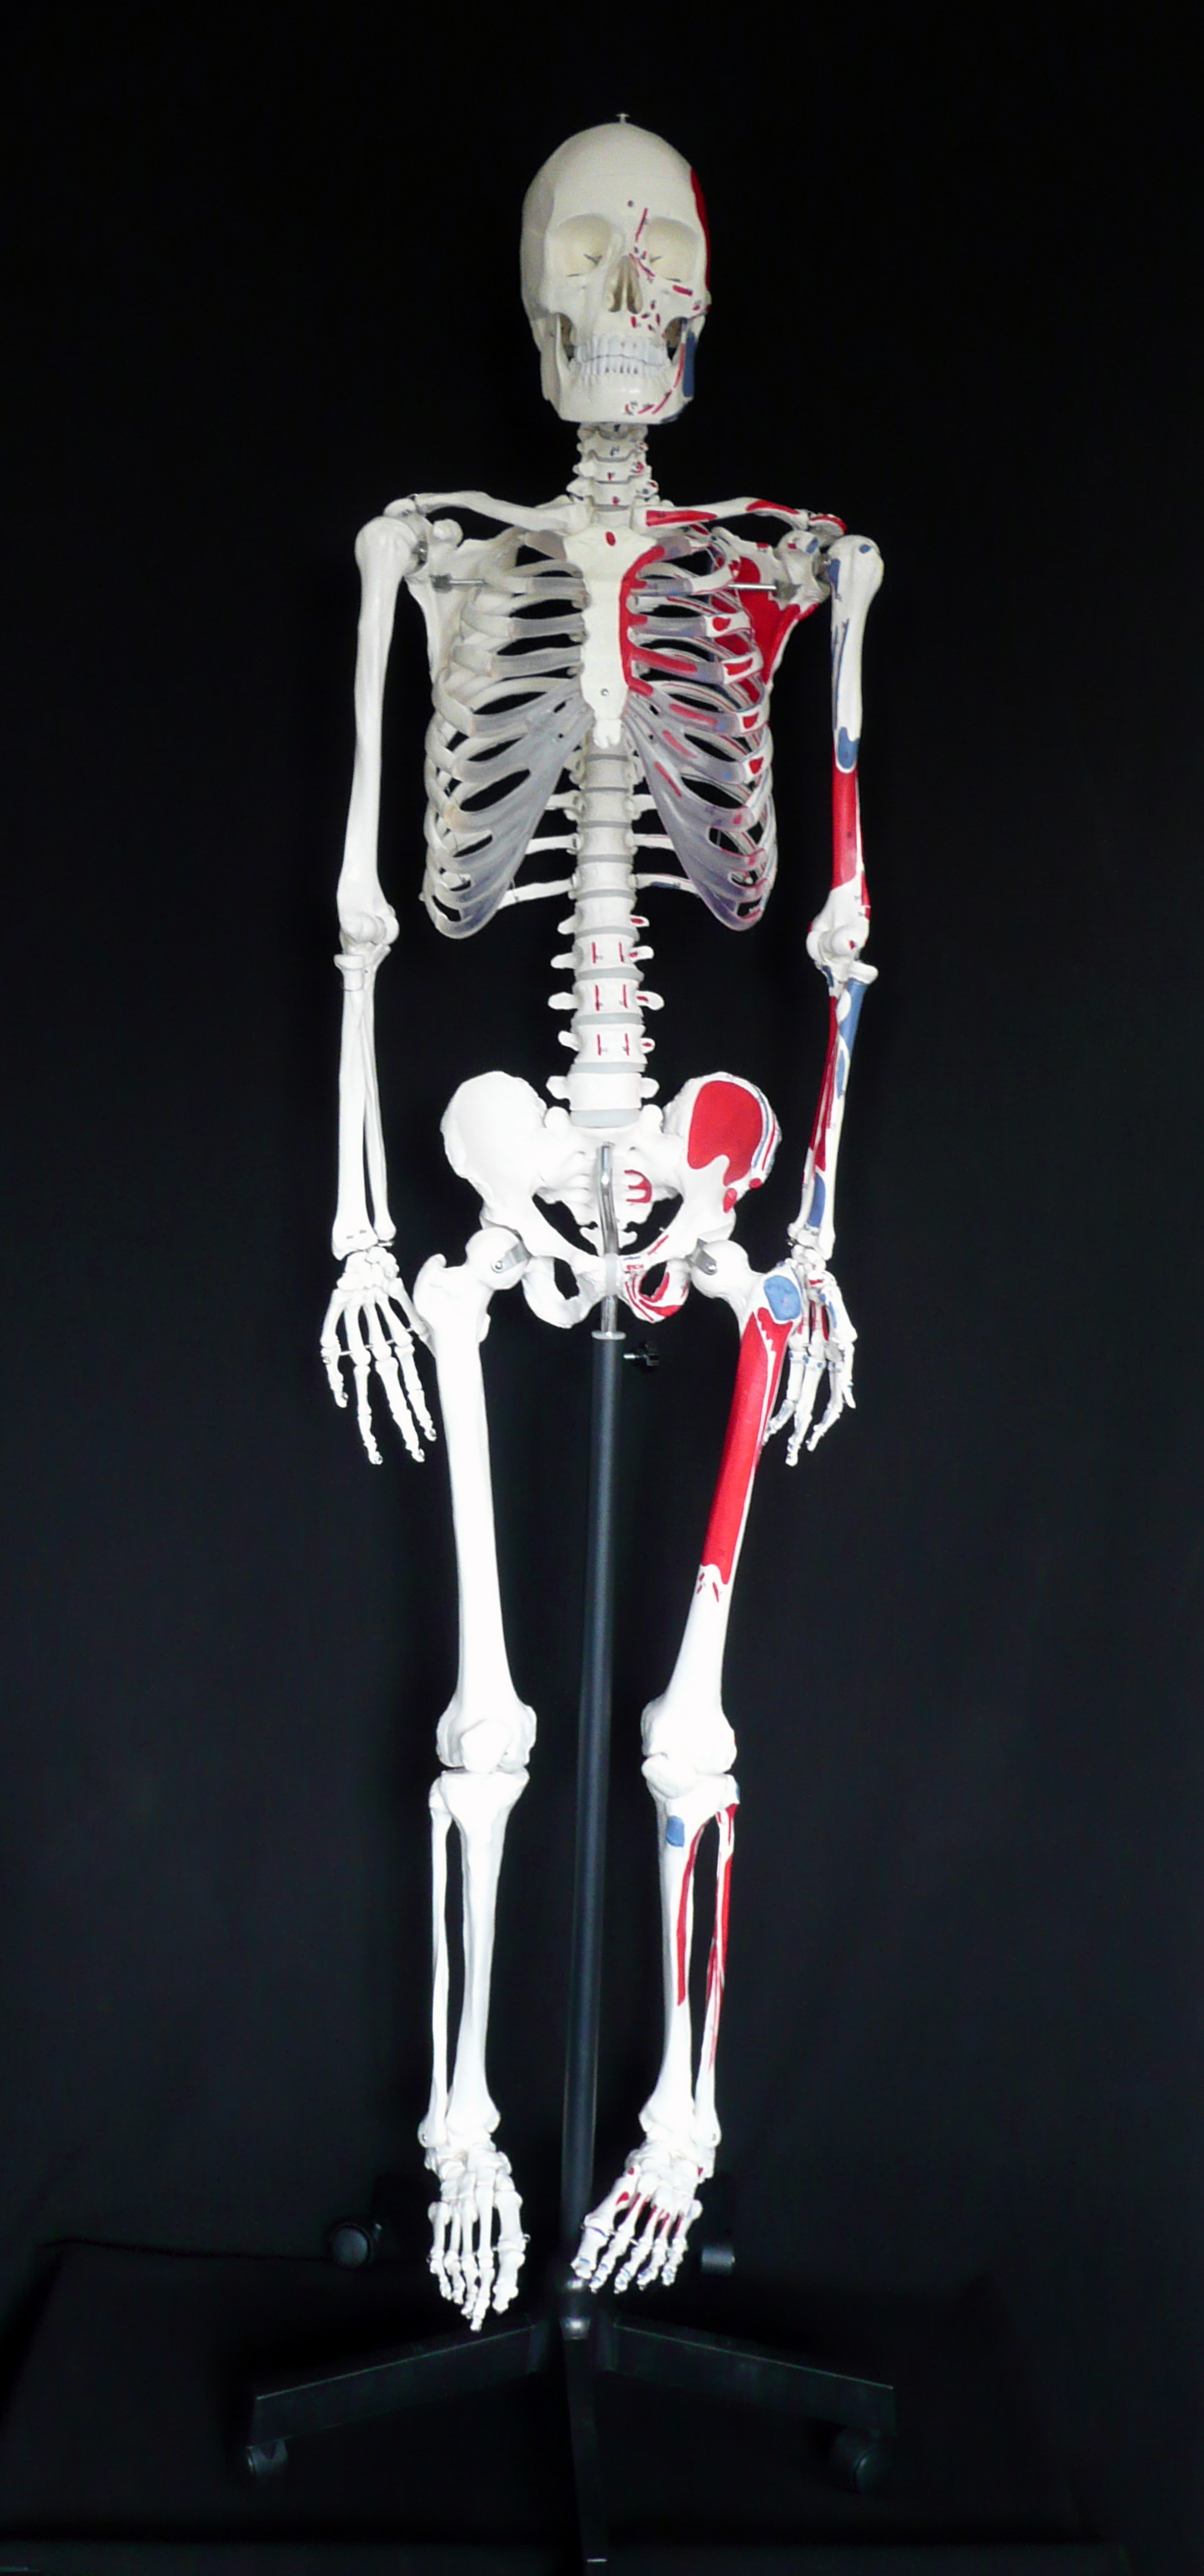 170cm Tall Life-Size Human Anatomical Skeleton Model with Muscle